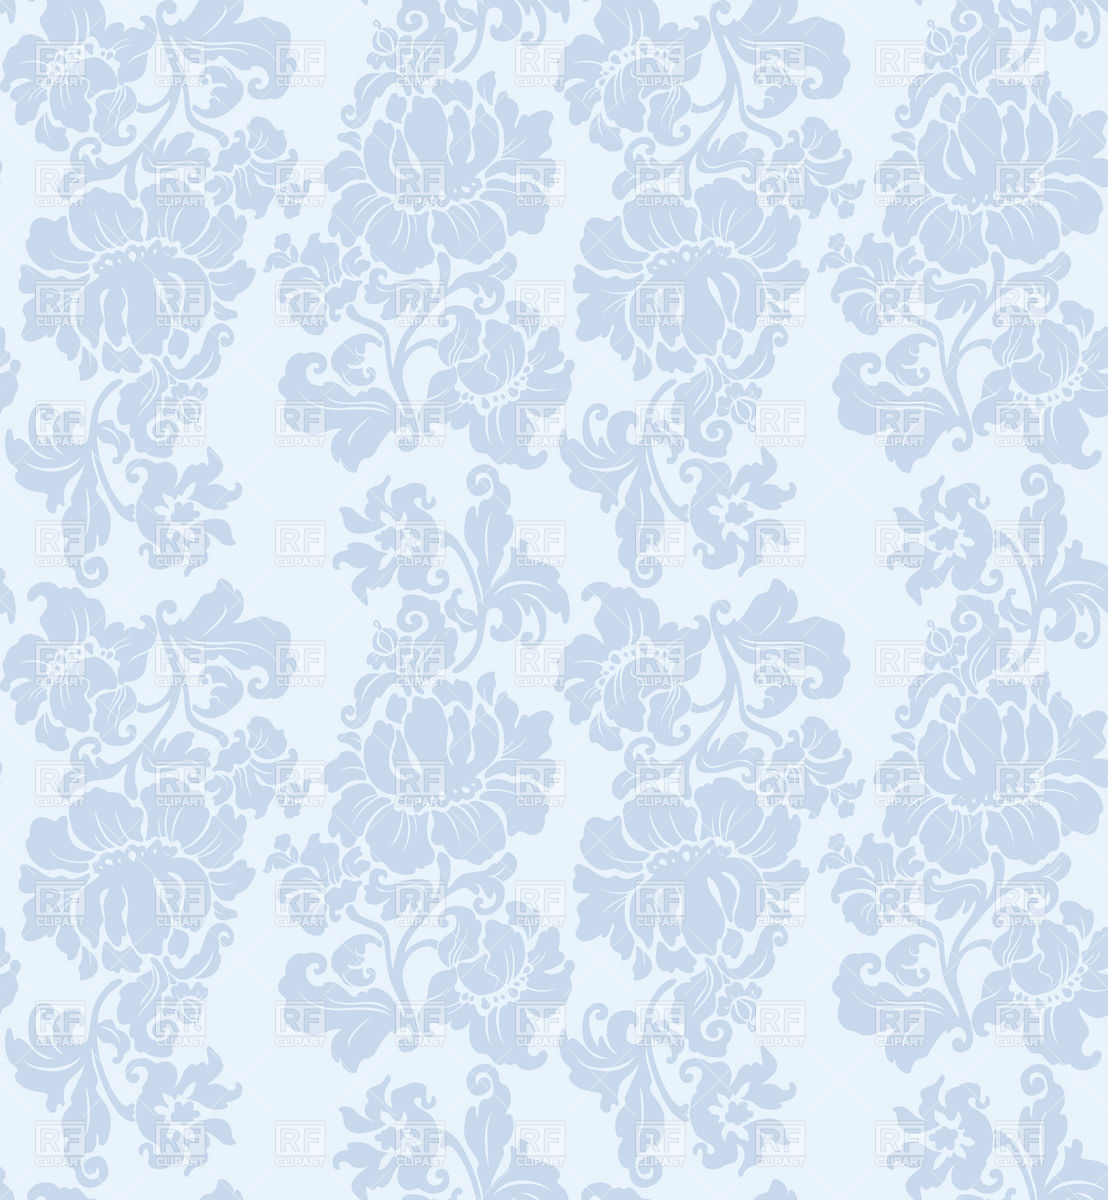 Floral Blue Seamless Victorian Wallpaper Background Textures